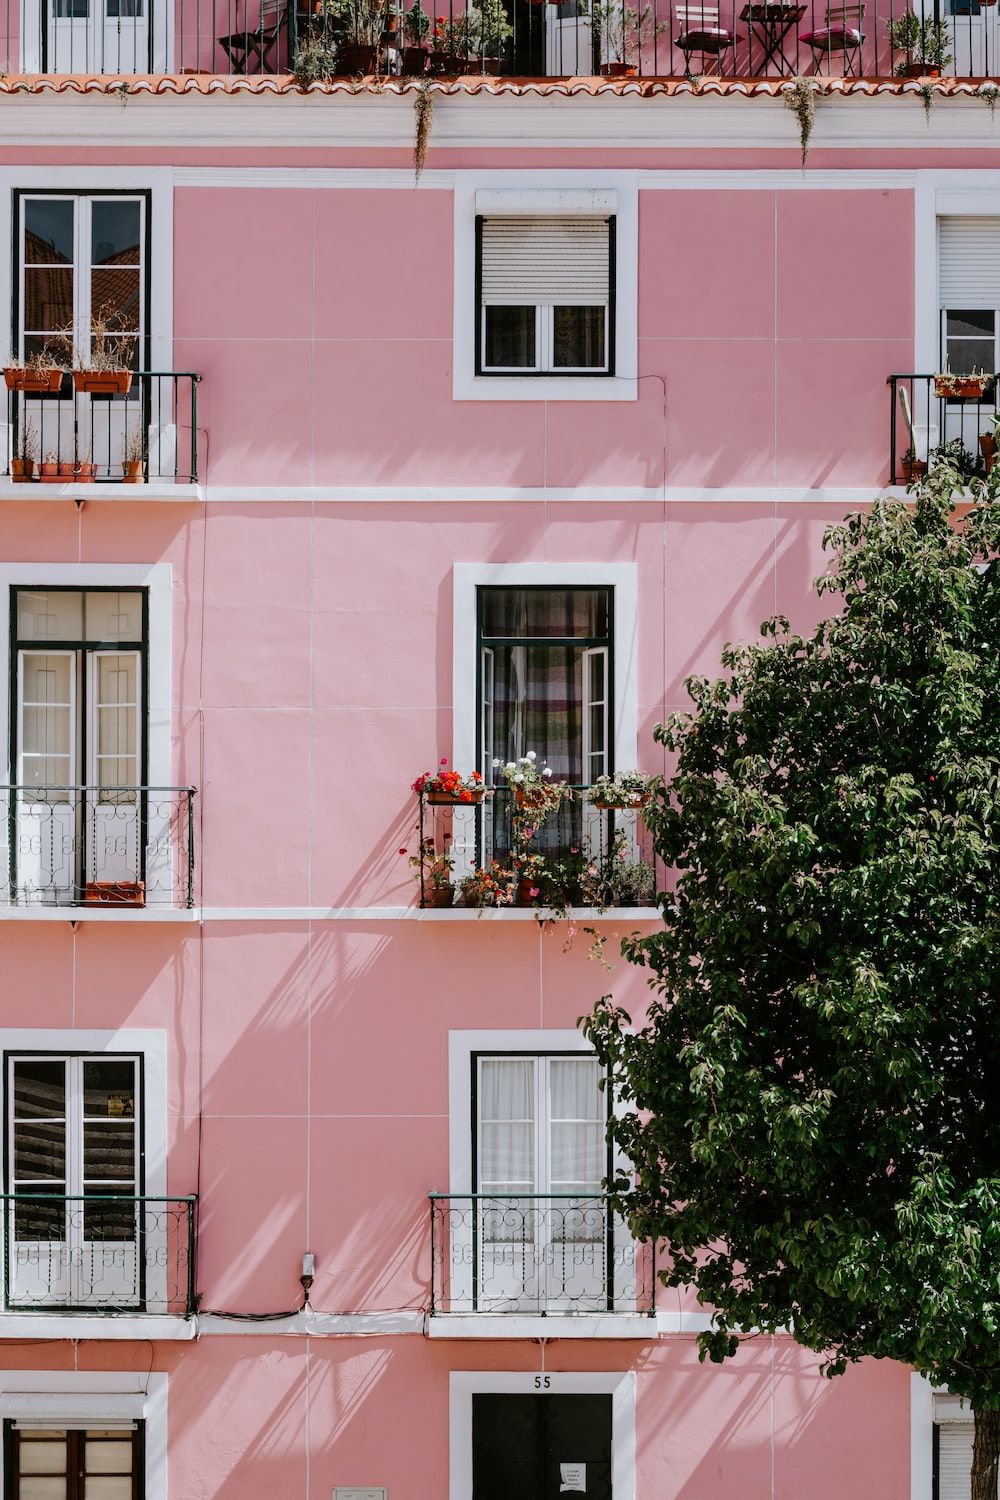 A pink building with balconies and trees - Pink, architecture, Italy, royalcore, blush